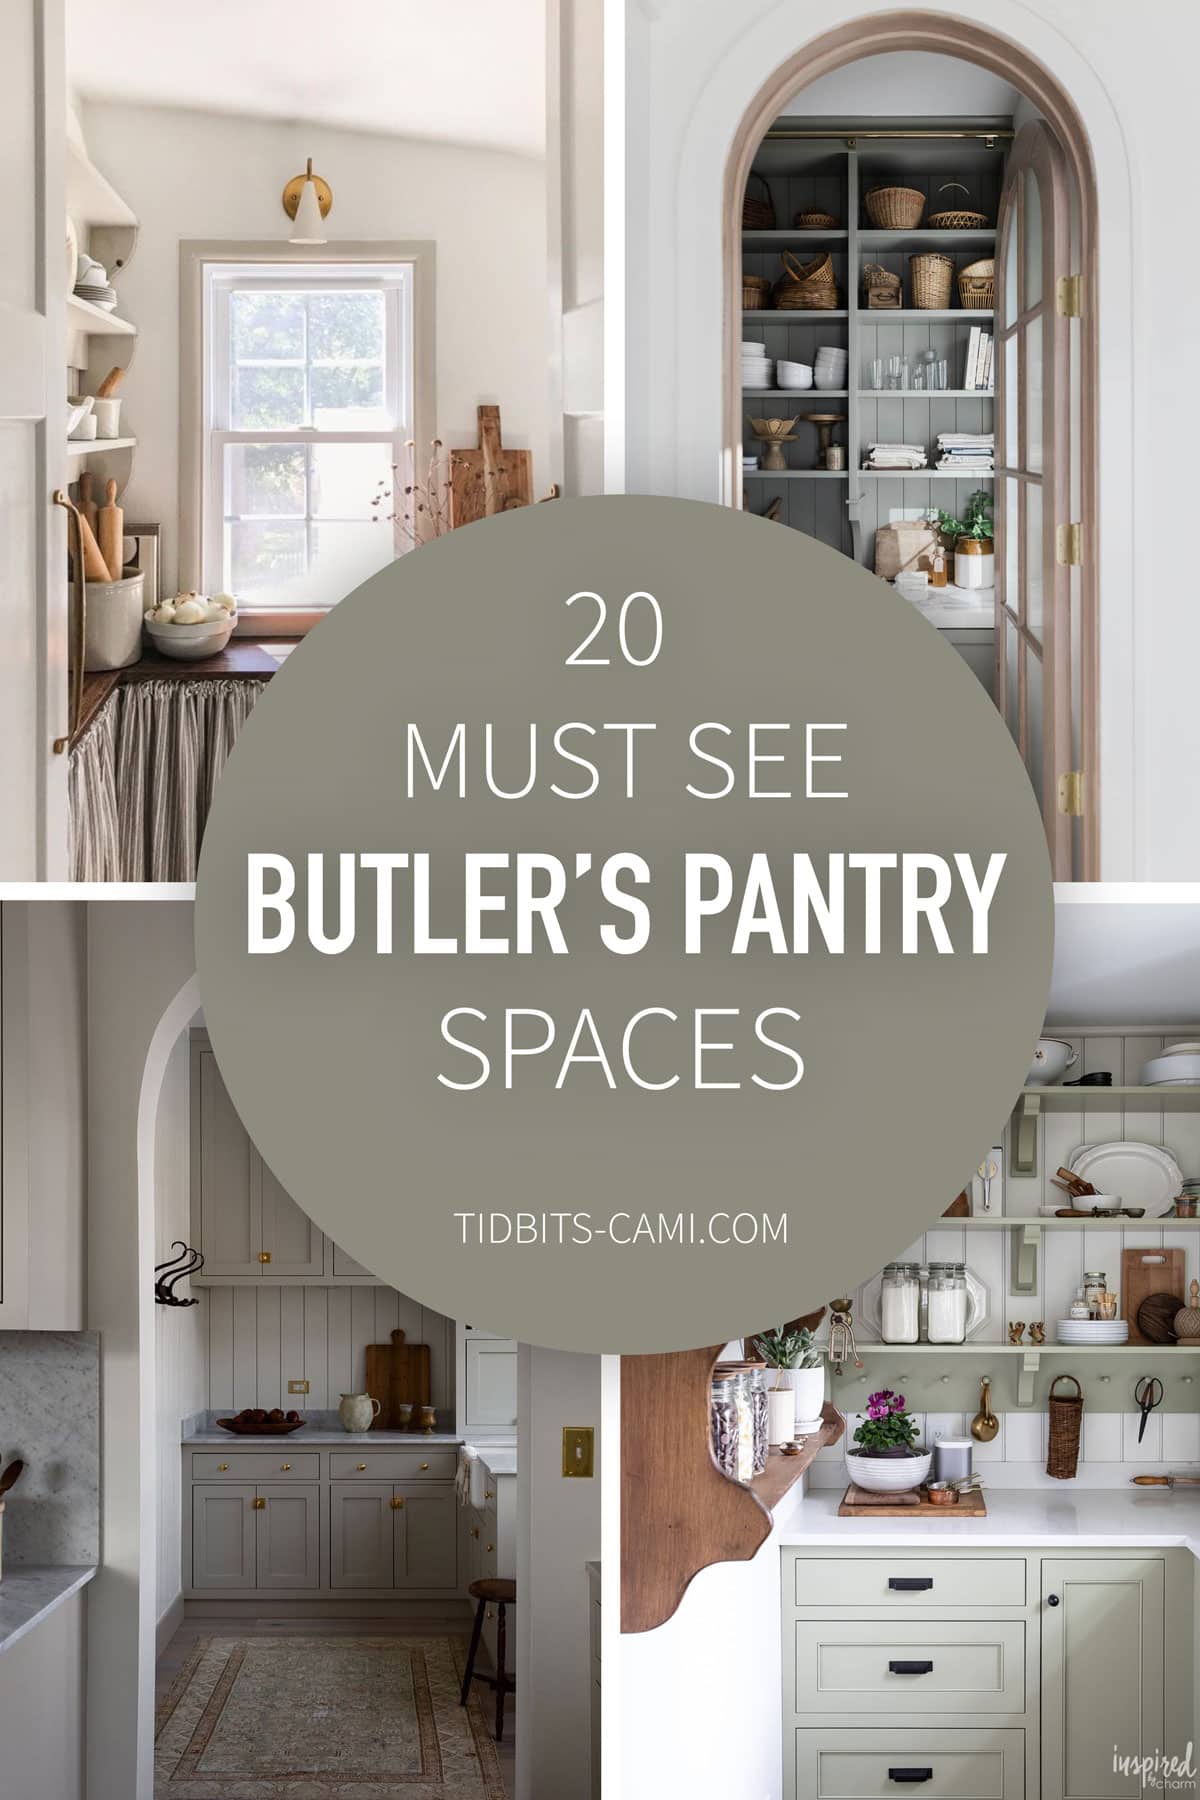 20 Kitchen Pantry Ideas With Form And Function: Transform Your Storage Space